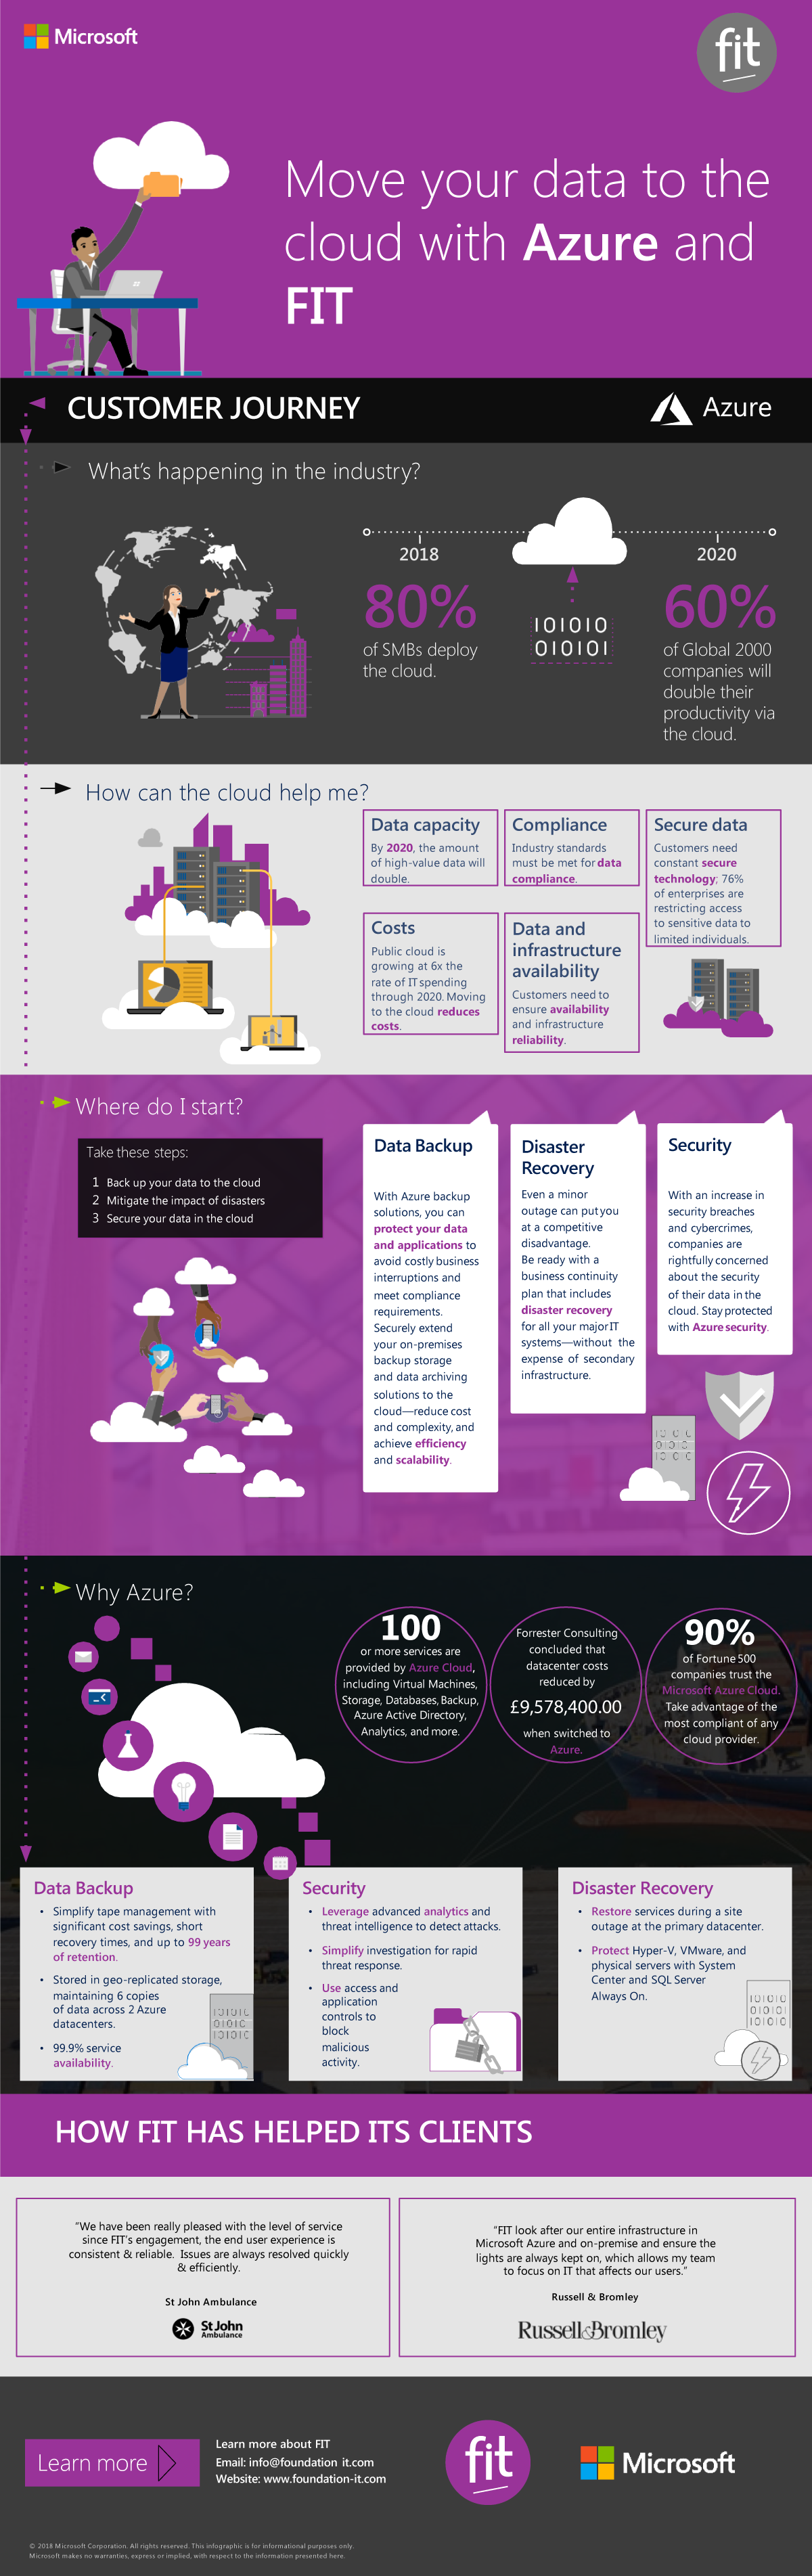 Move Your Data To The Cloud - Infographic by FiT